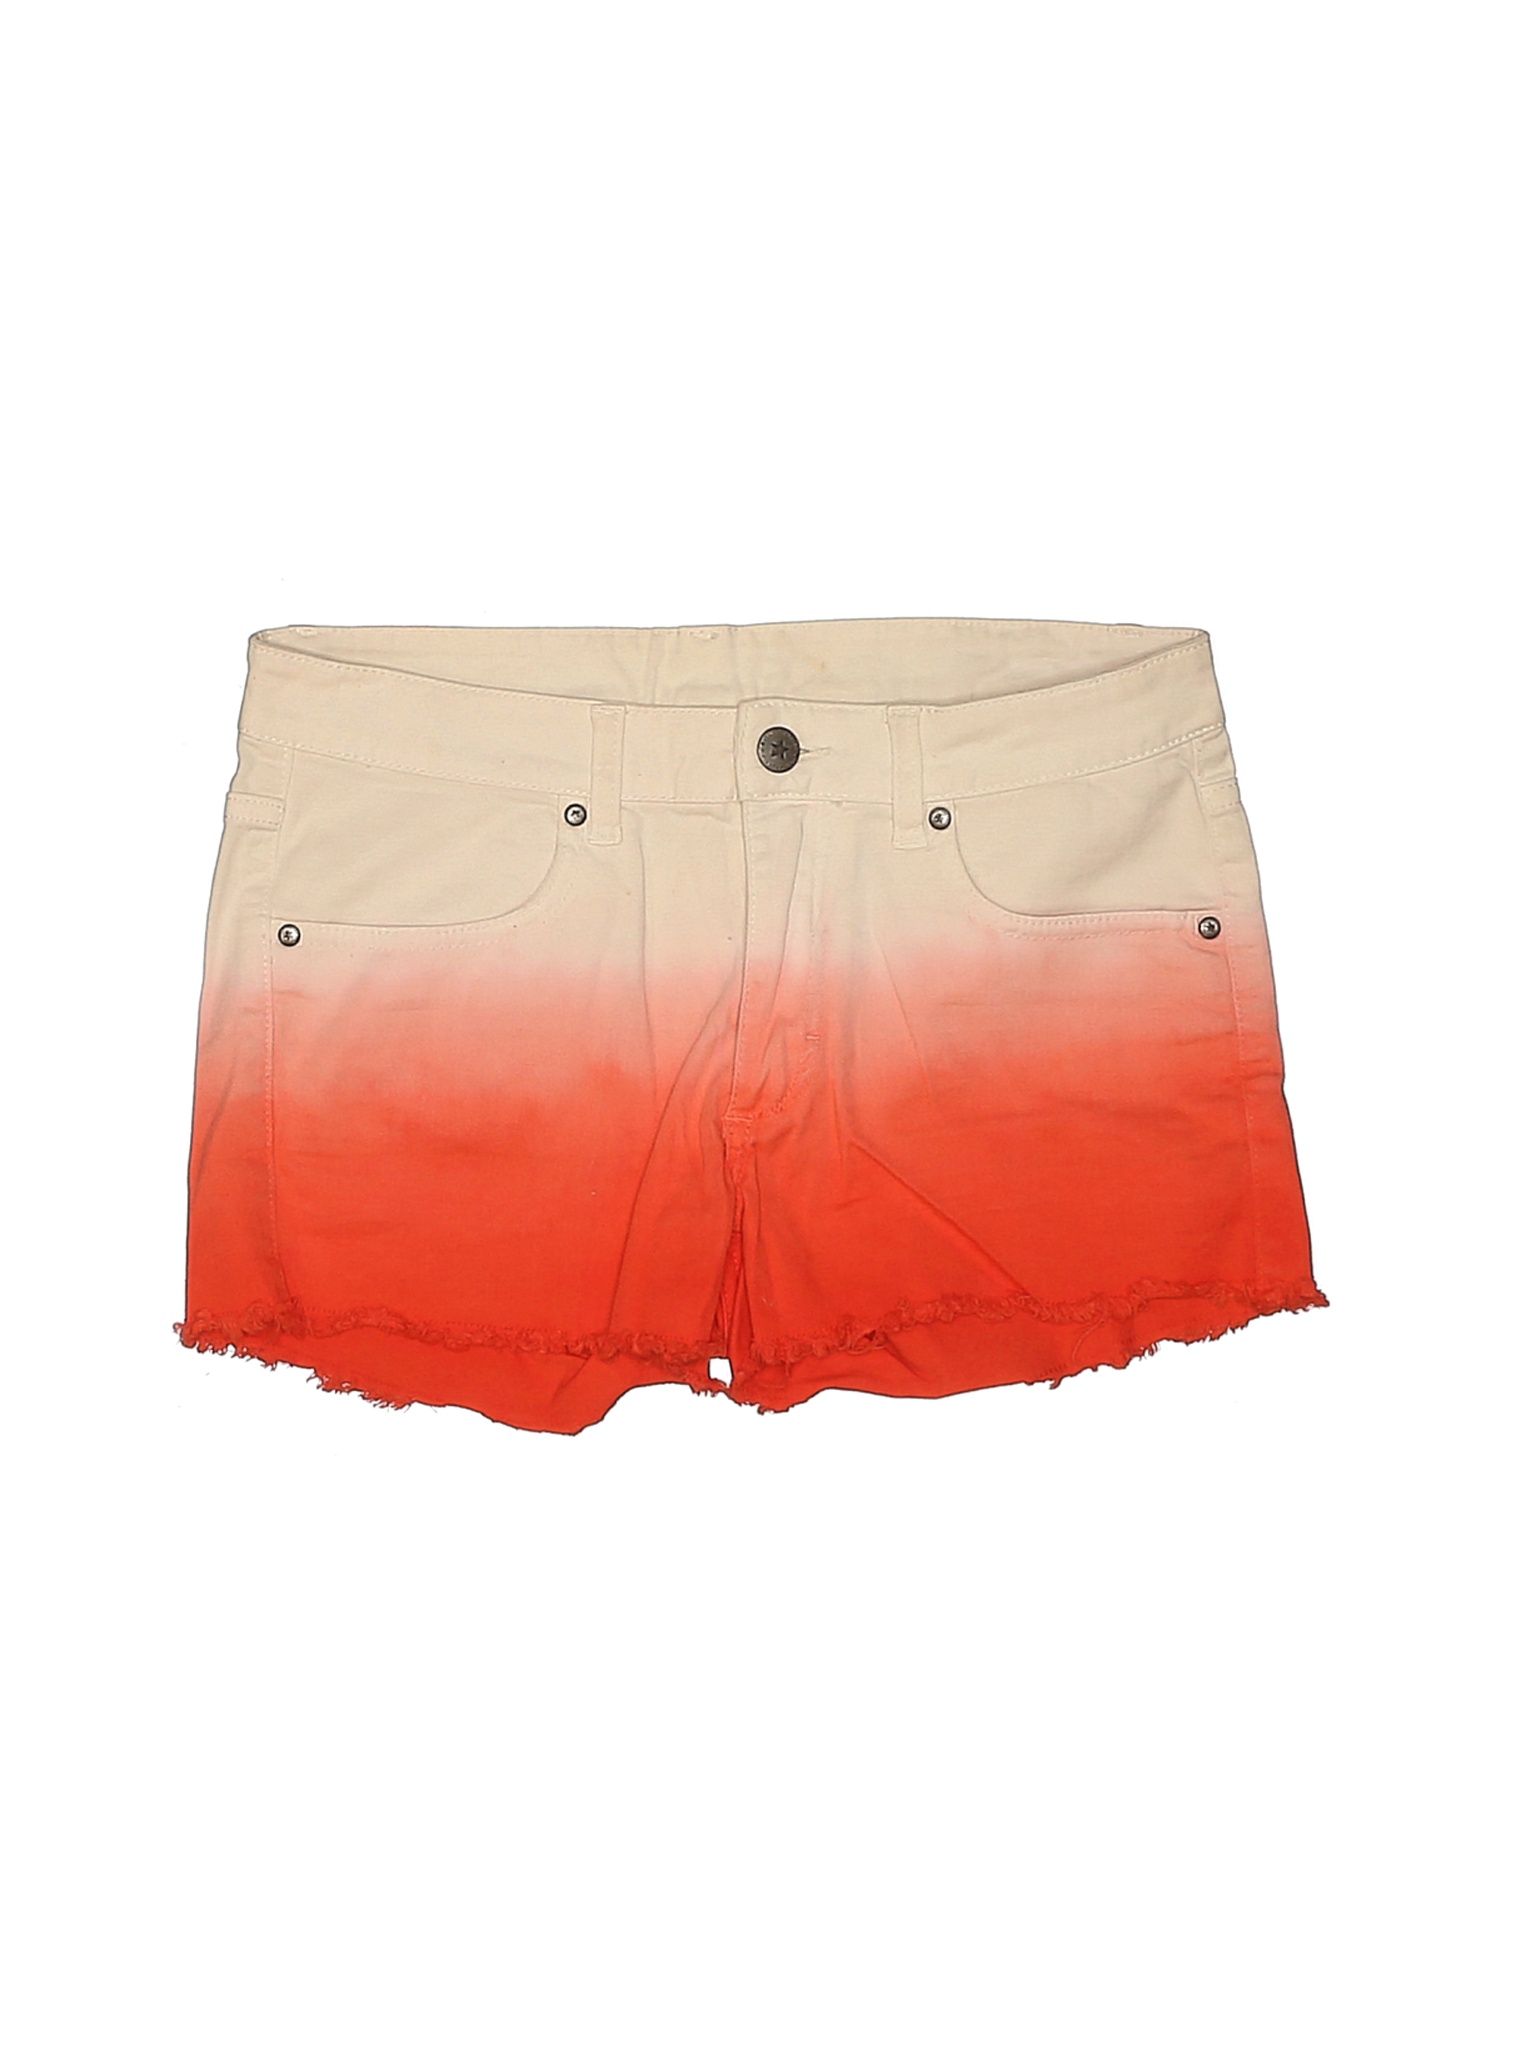 h&m shorts for girls